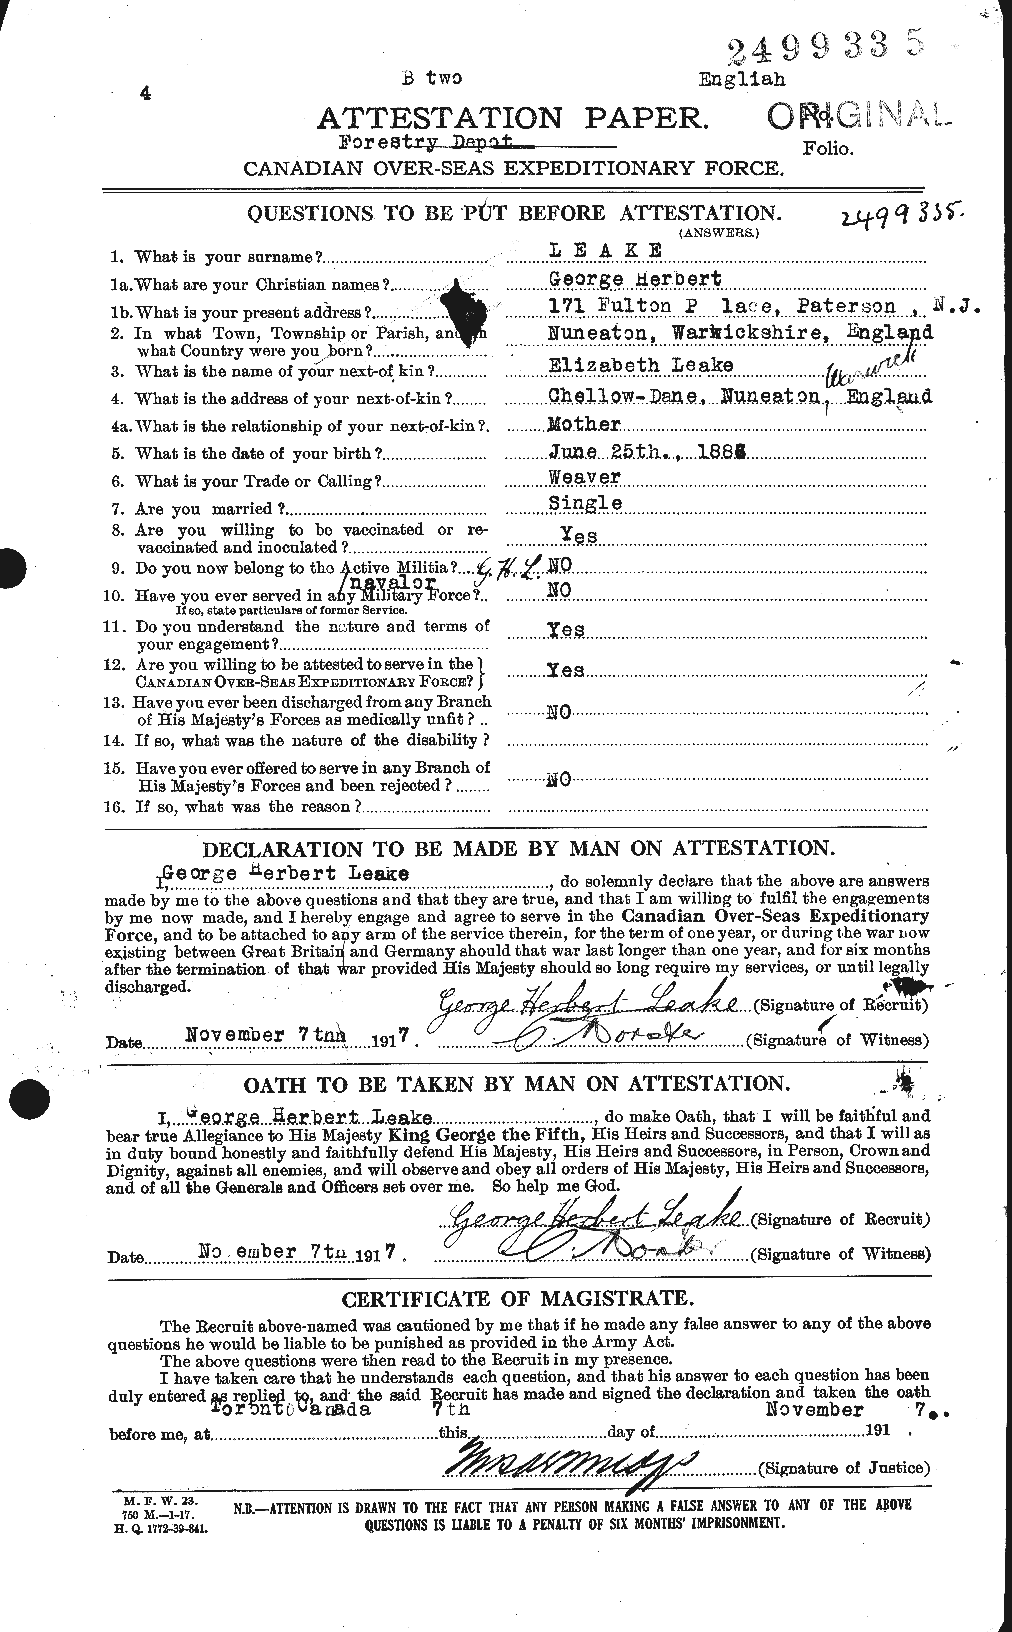 Personnel Records of the First World War - CEF 455981a